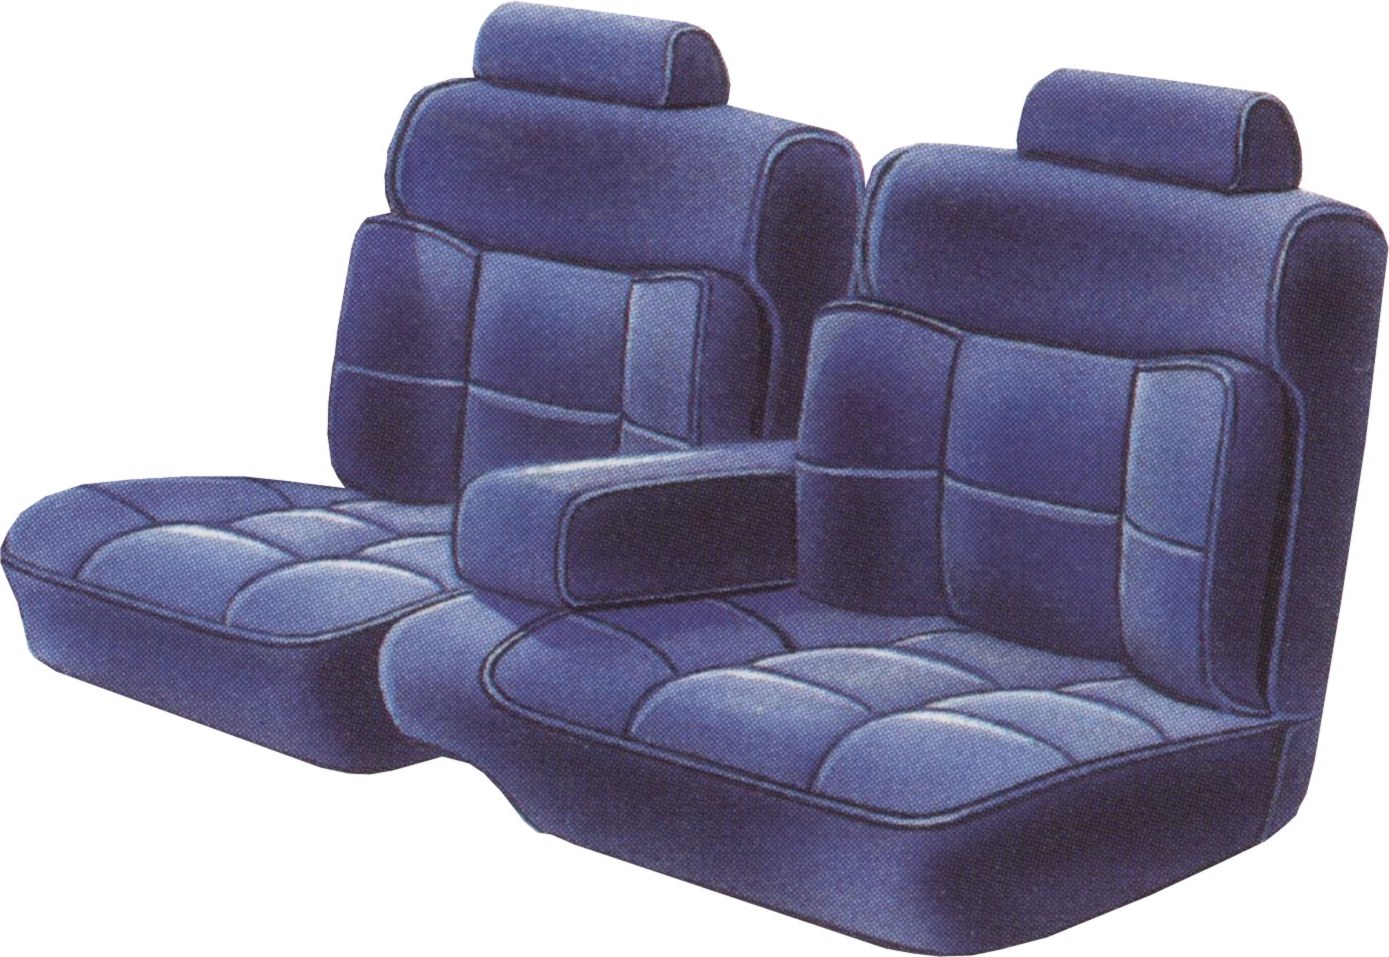 1987-88 Monte Carlo CL Front and Rear Seat Cover Set